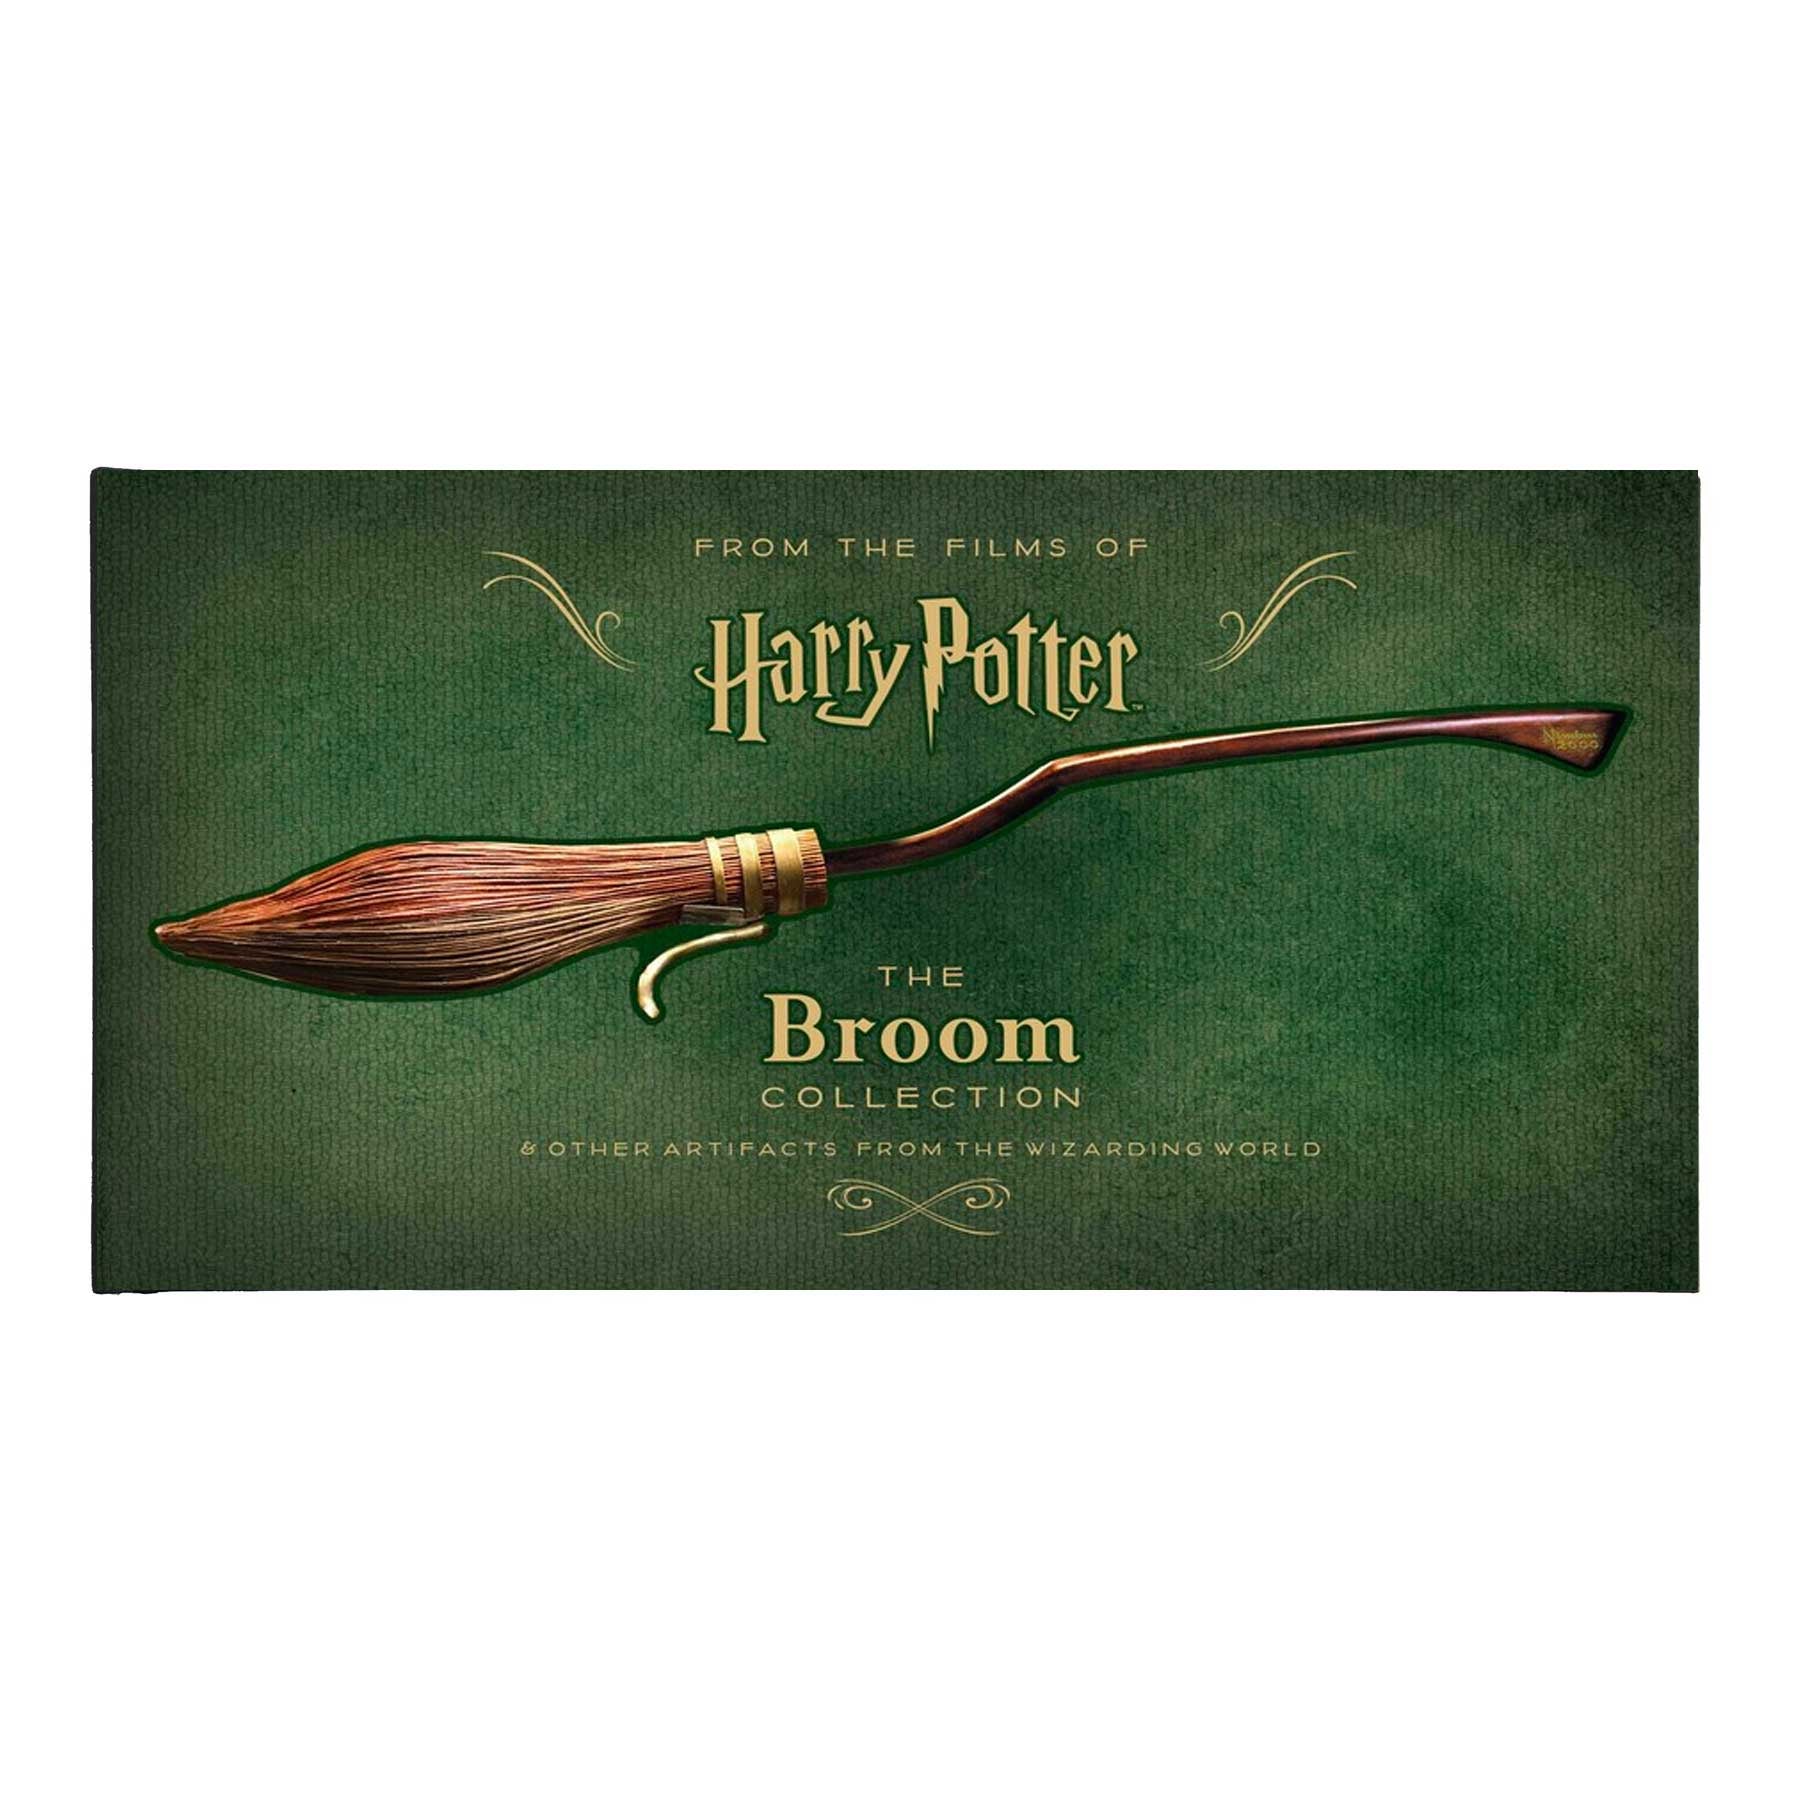 The Broom Collection Book